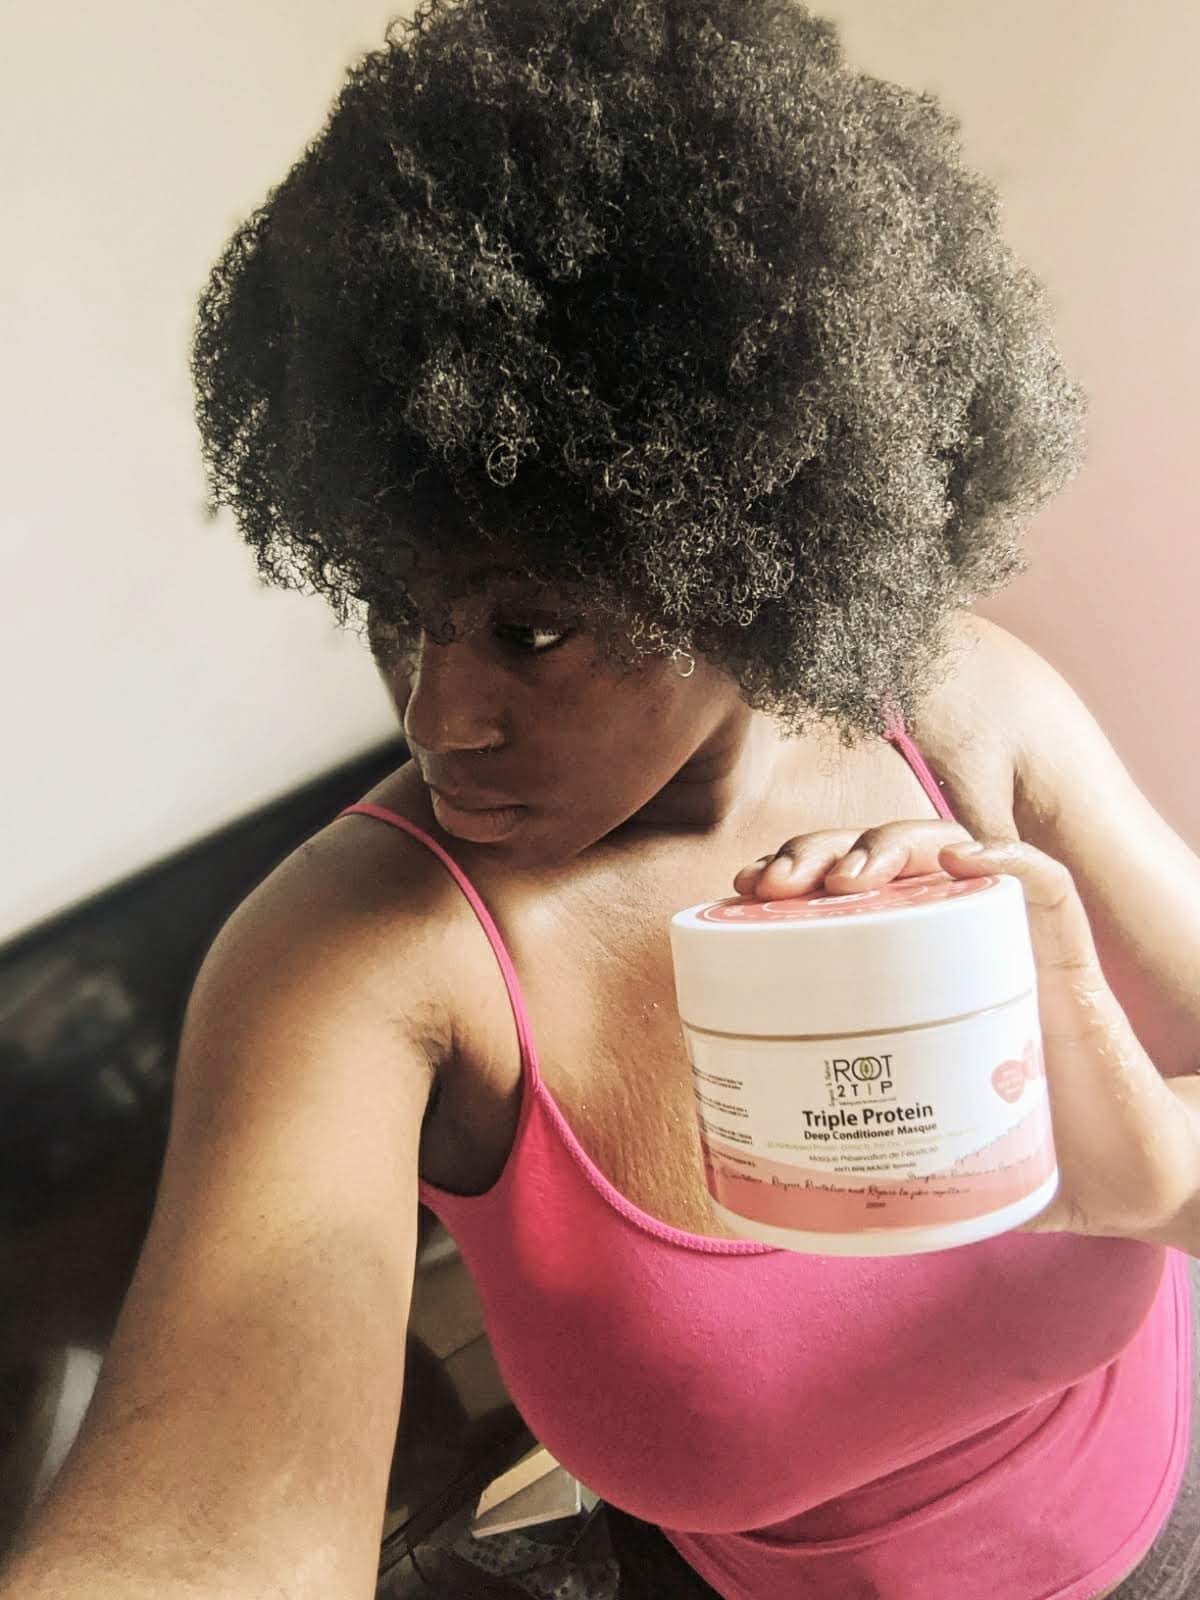 TRIPLE Protein Strengthening Hair Mask - Deep Conditioner